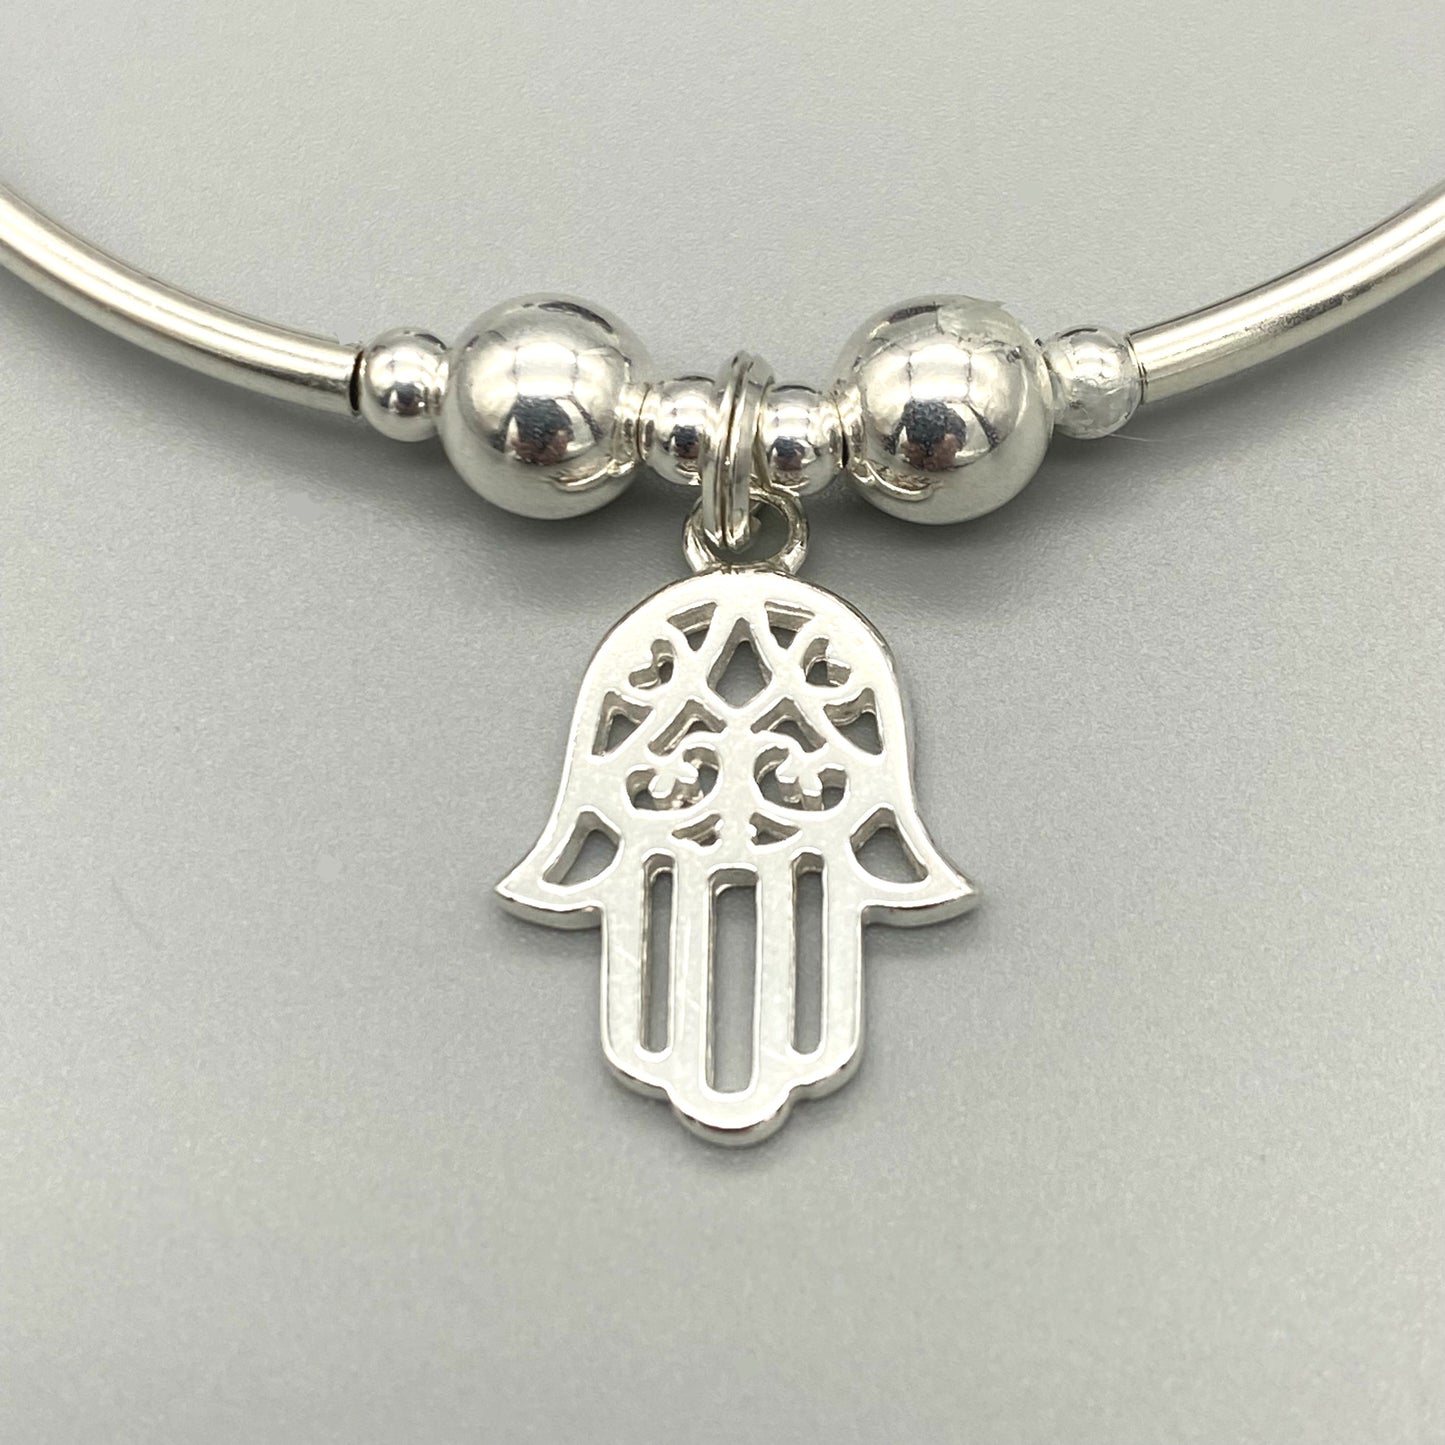 Closeup of Hamsa Hand Charm Amethyst Healing Crystal Sterling Silver Women's Stacking Bracelet by My Silver Wish